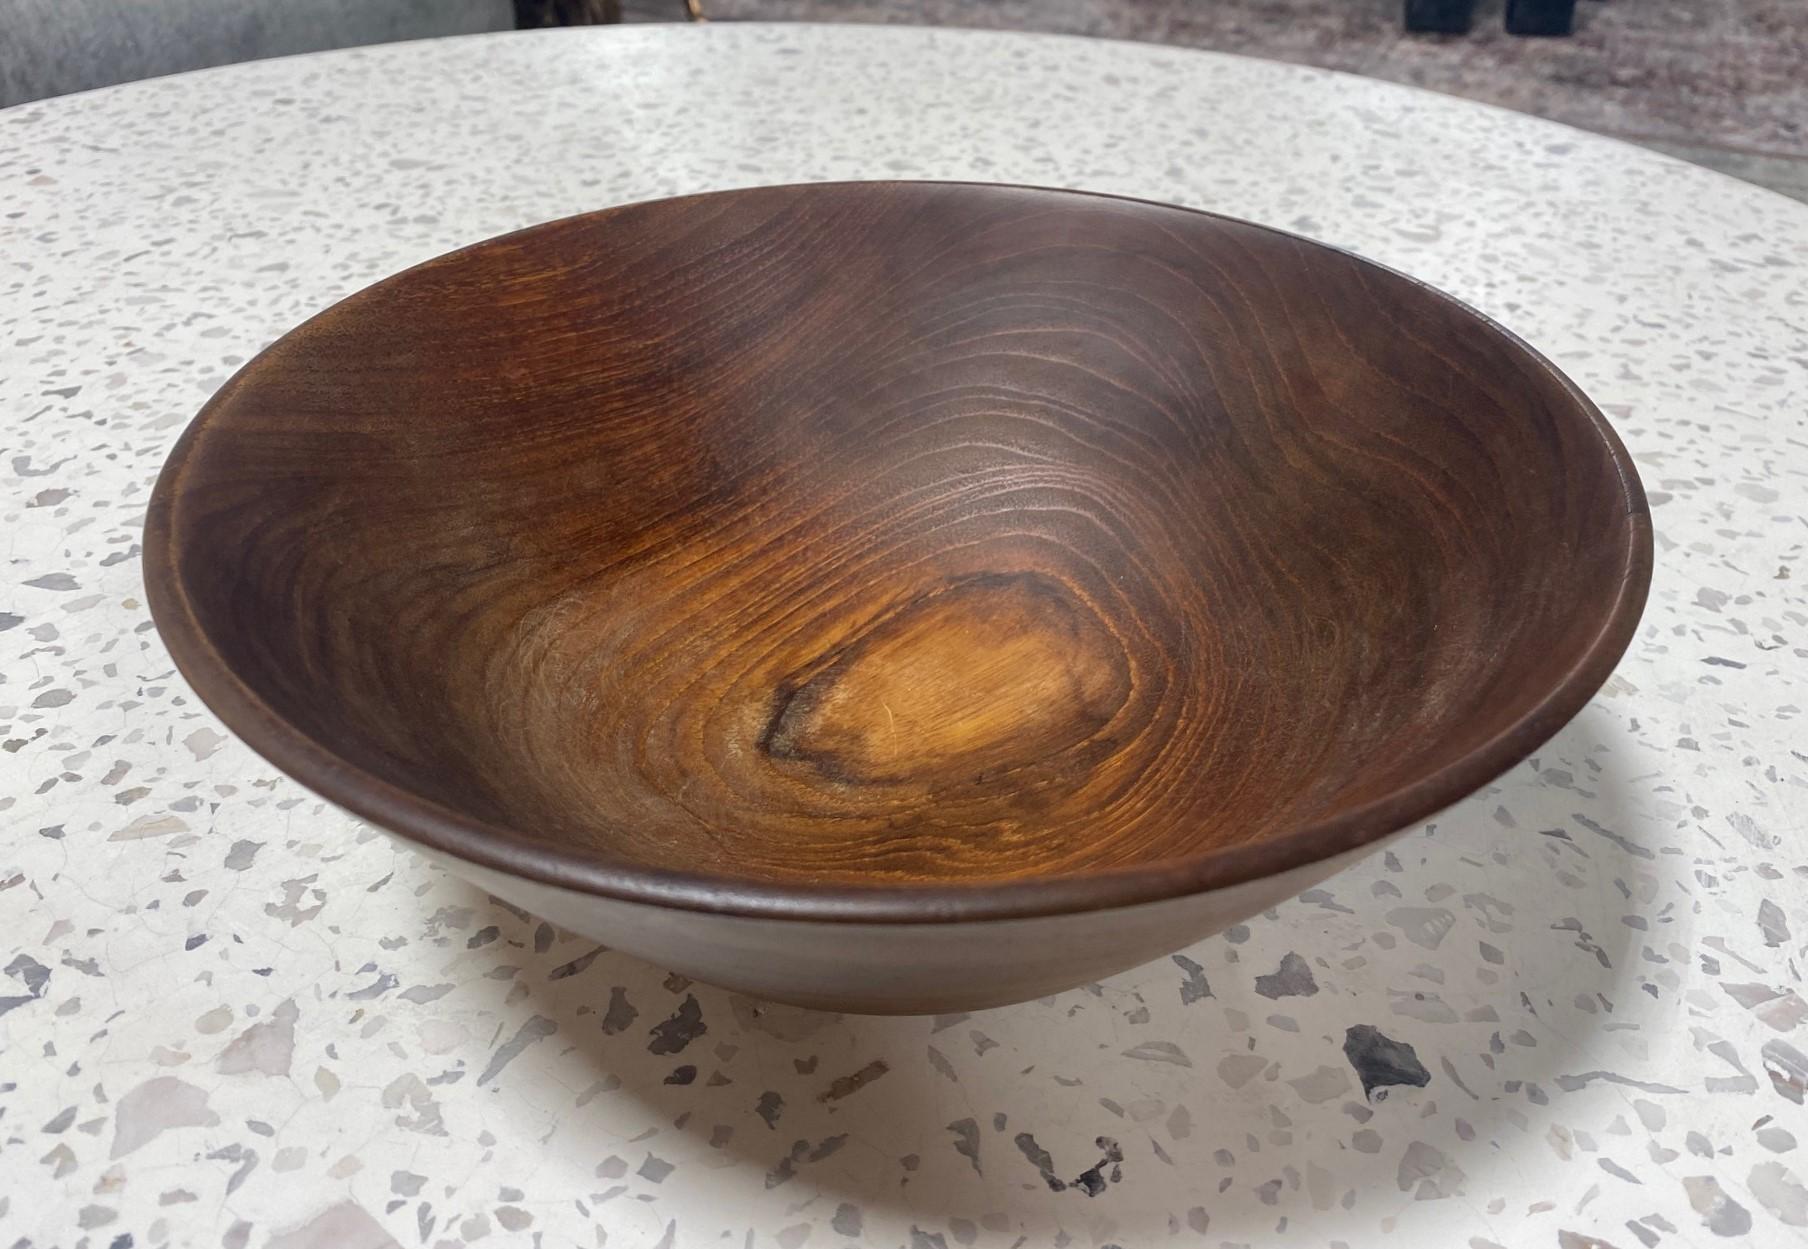 Bob Stocksdale Signed Mid-Century Modern Turned Teak Wood Large Art Bowl In Good Condition For Sale In Studio City, CA